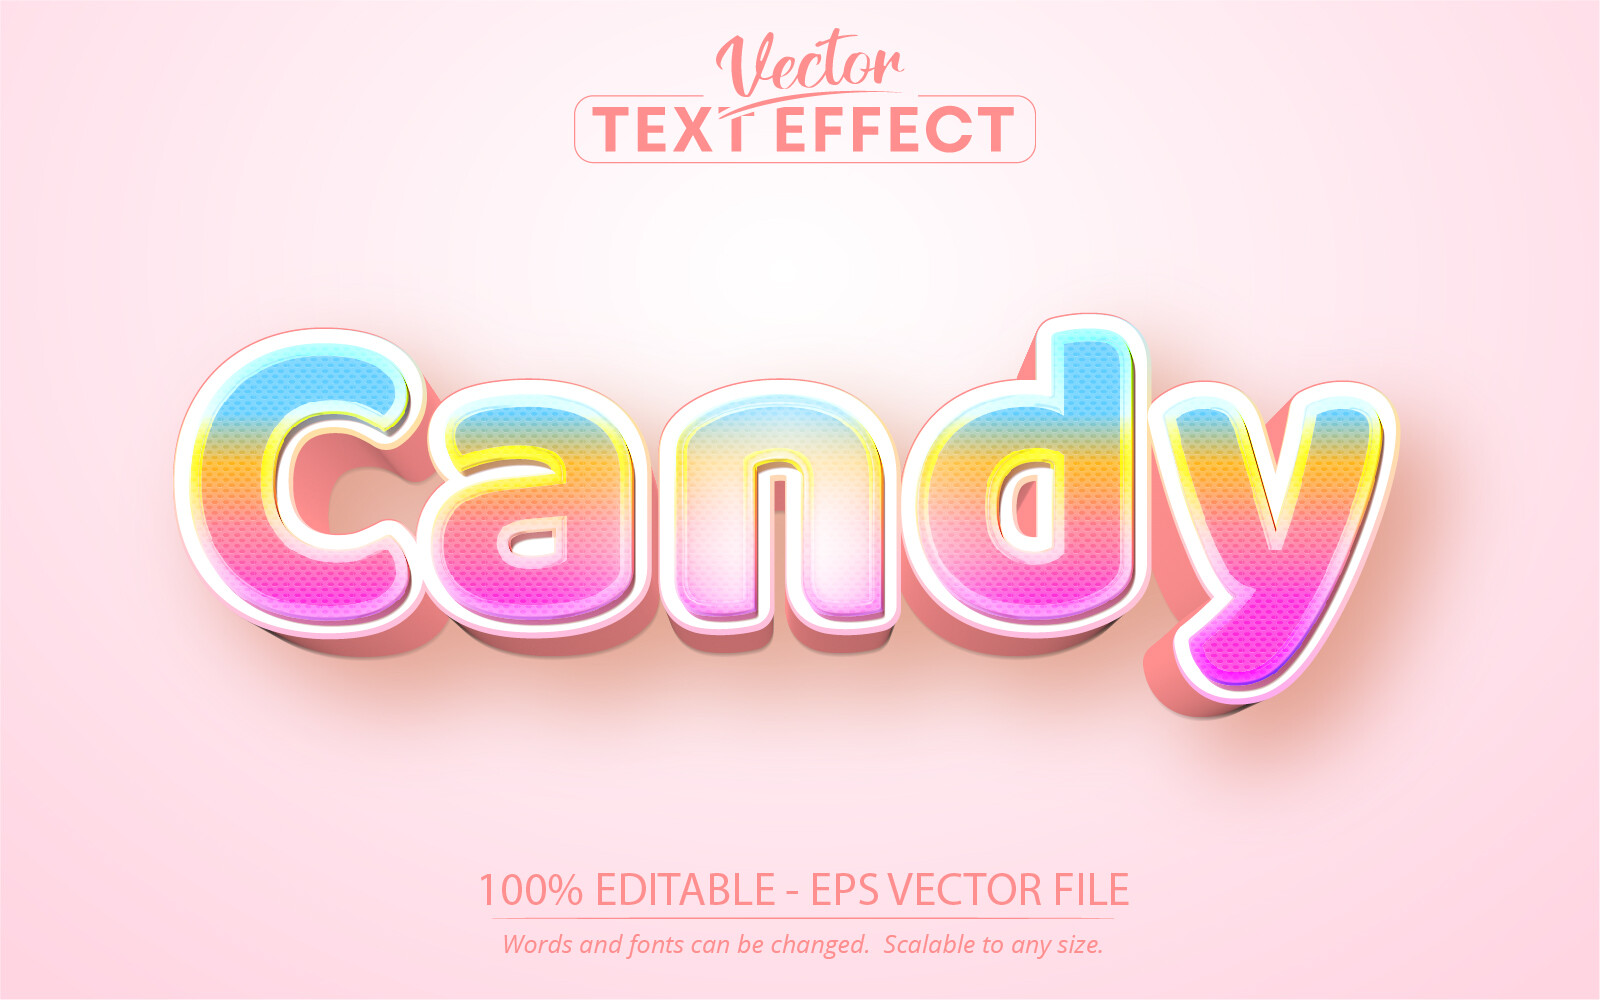 Стиль текста Candy. Candy текст. Candy Style text. Pink Candy text Effect.